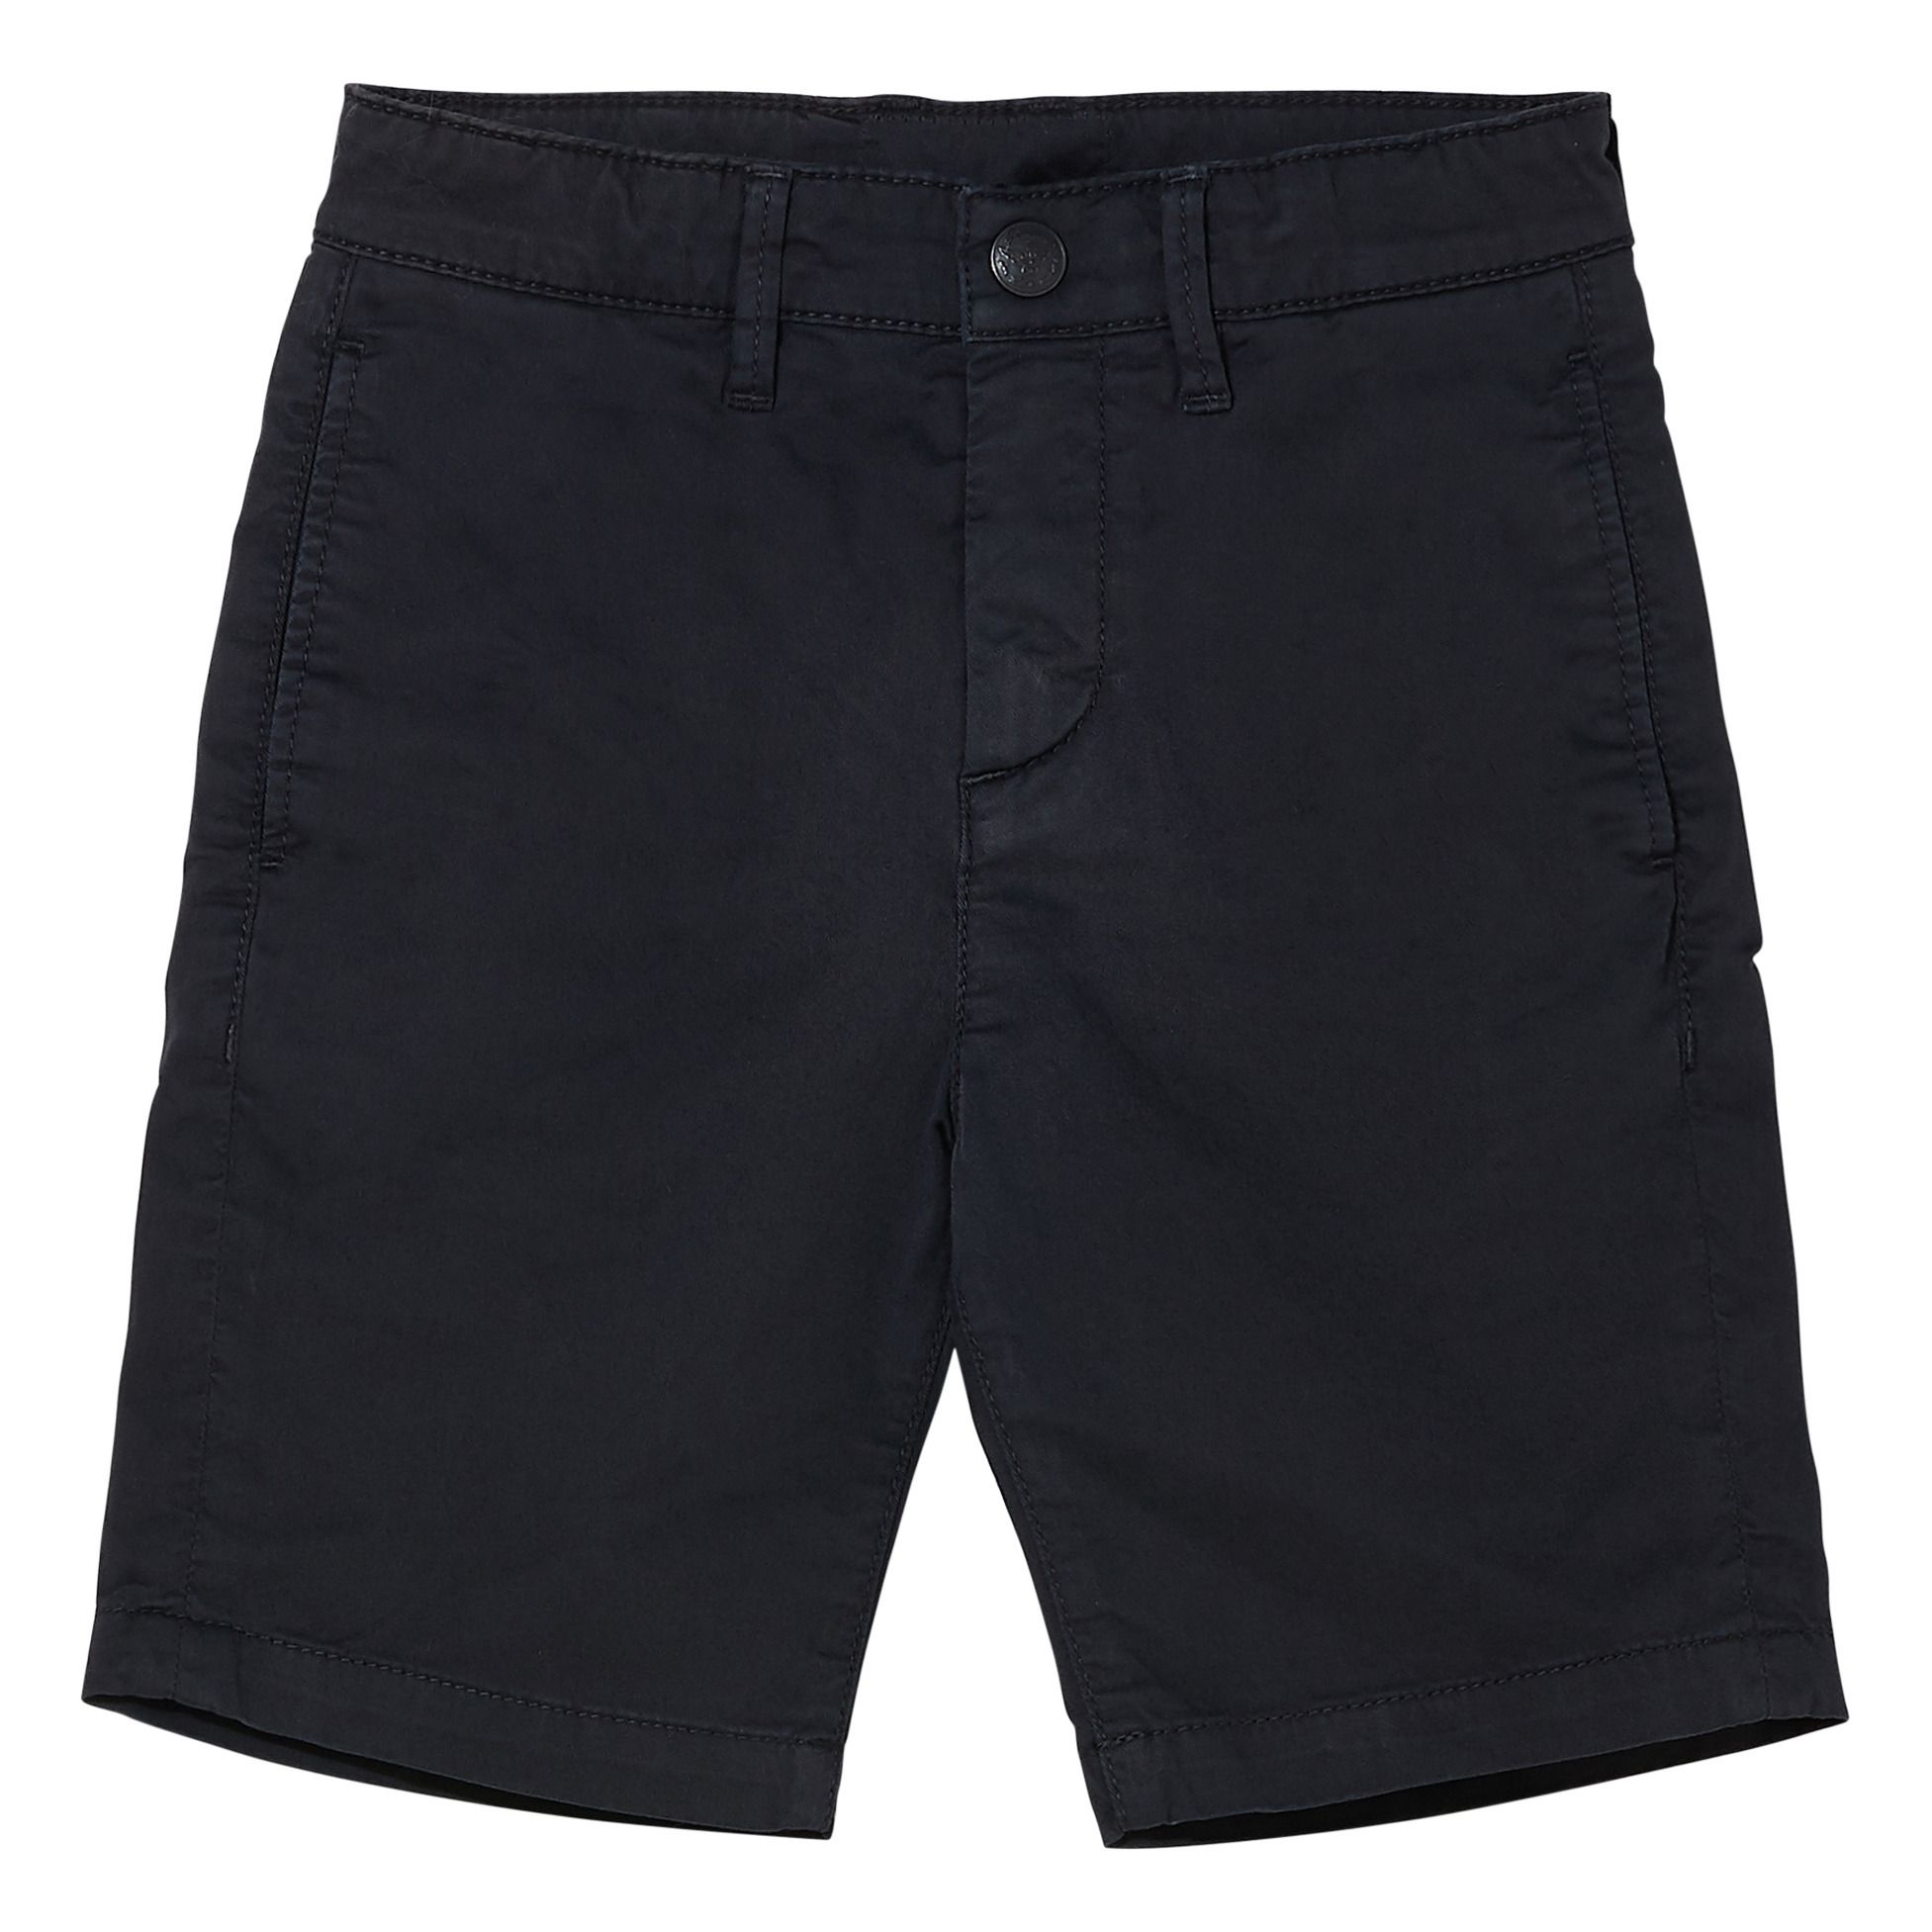 Finger in the nose - Allen Chino Shorts - Black | Smallable